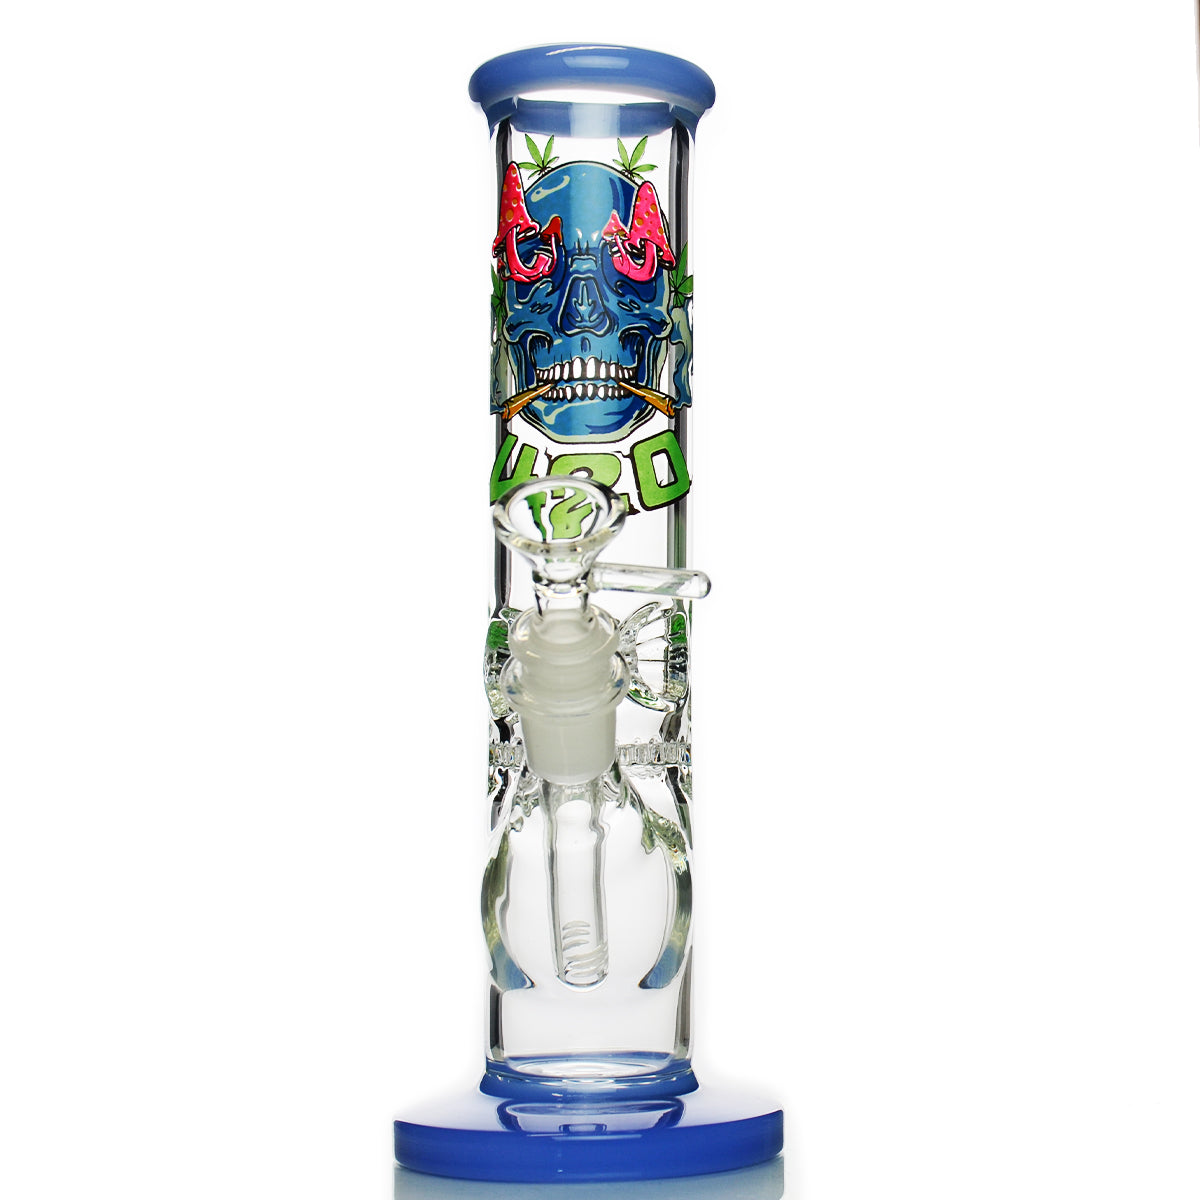 10" 420 Skull Water Pipe with Honeycomb Perc and 14mm Male Bowl